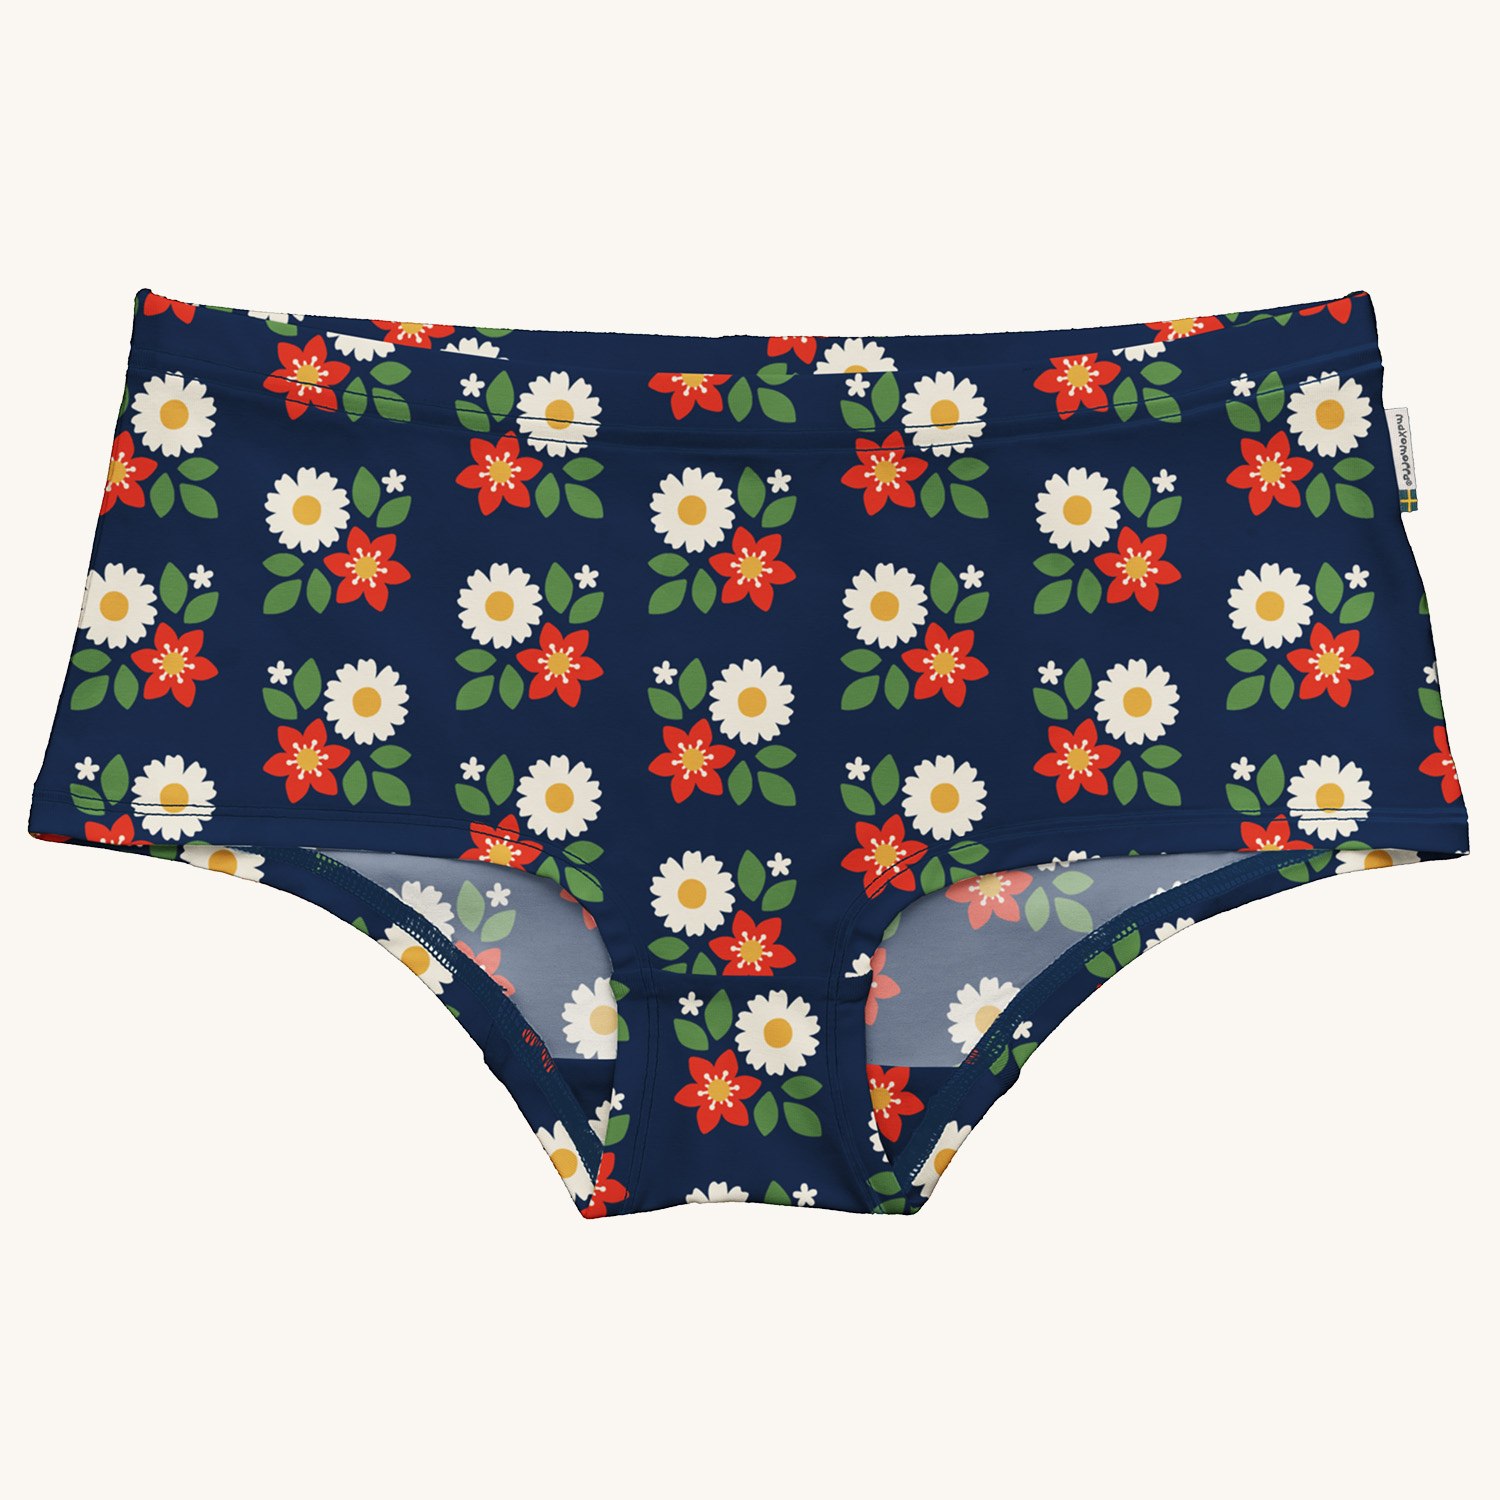 Ethical organic cotton knickers - Maxomorra